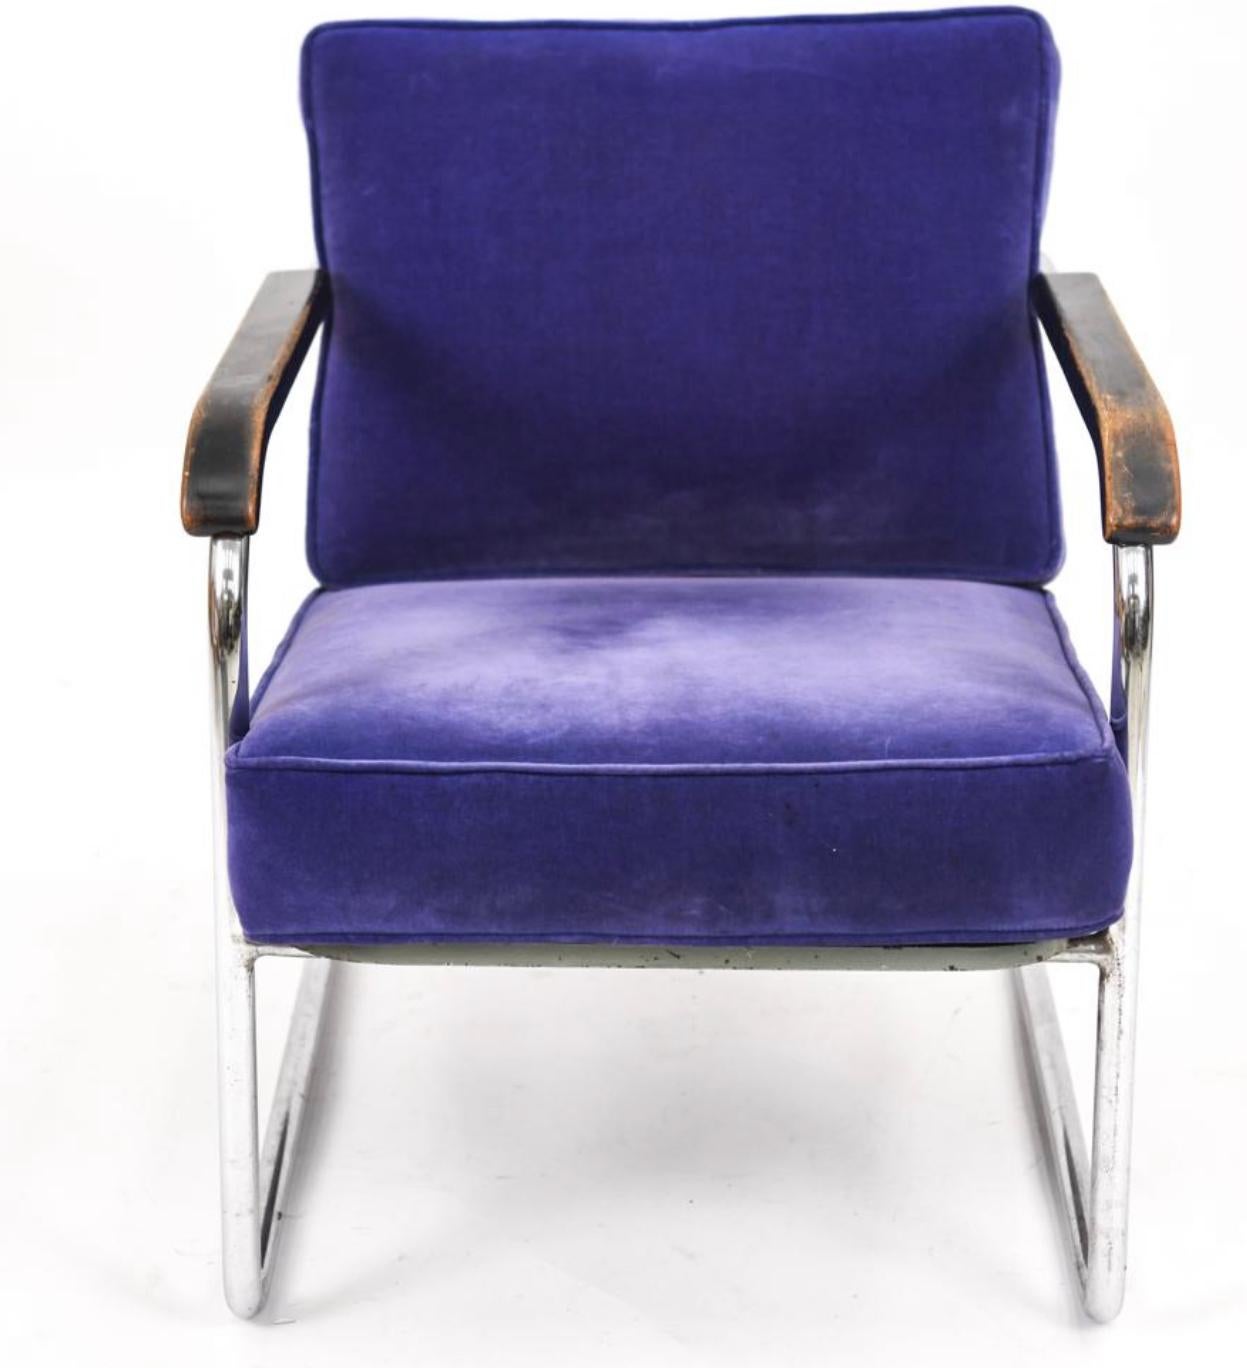 Werner Max Moser for Embru Wohnbedarf WM1 Lounge Chair Zurich, Switzerland, c. 1939
Rare Lounge chair by Werner Max Moser. Manufactured by Embru Wohnbedarf, Zurich Switzerland. Bauhaus chrome-plated tubular steel, painted wood and velvet upholstery.